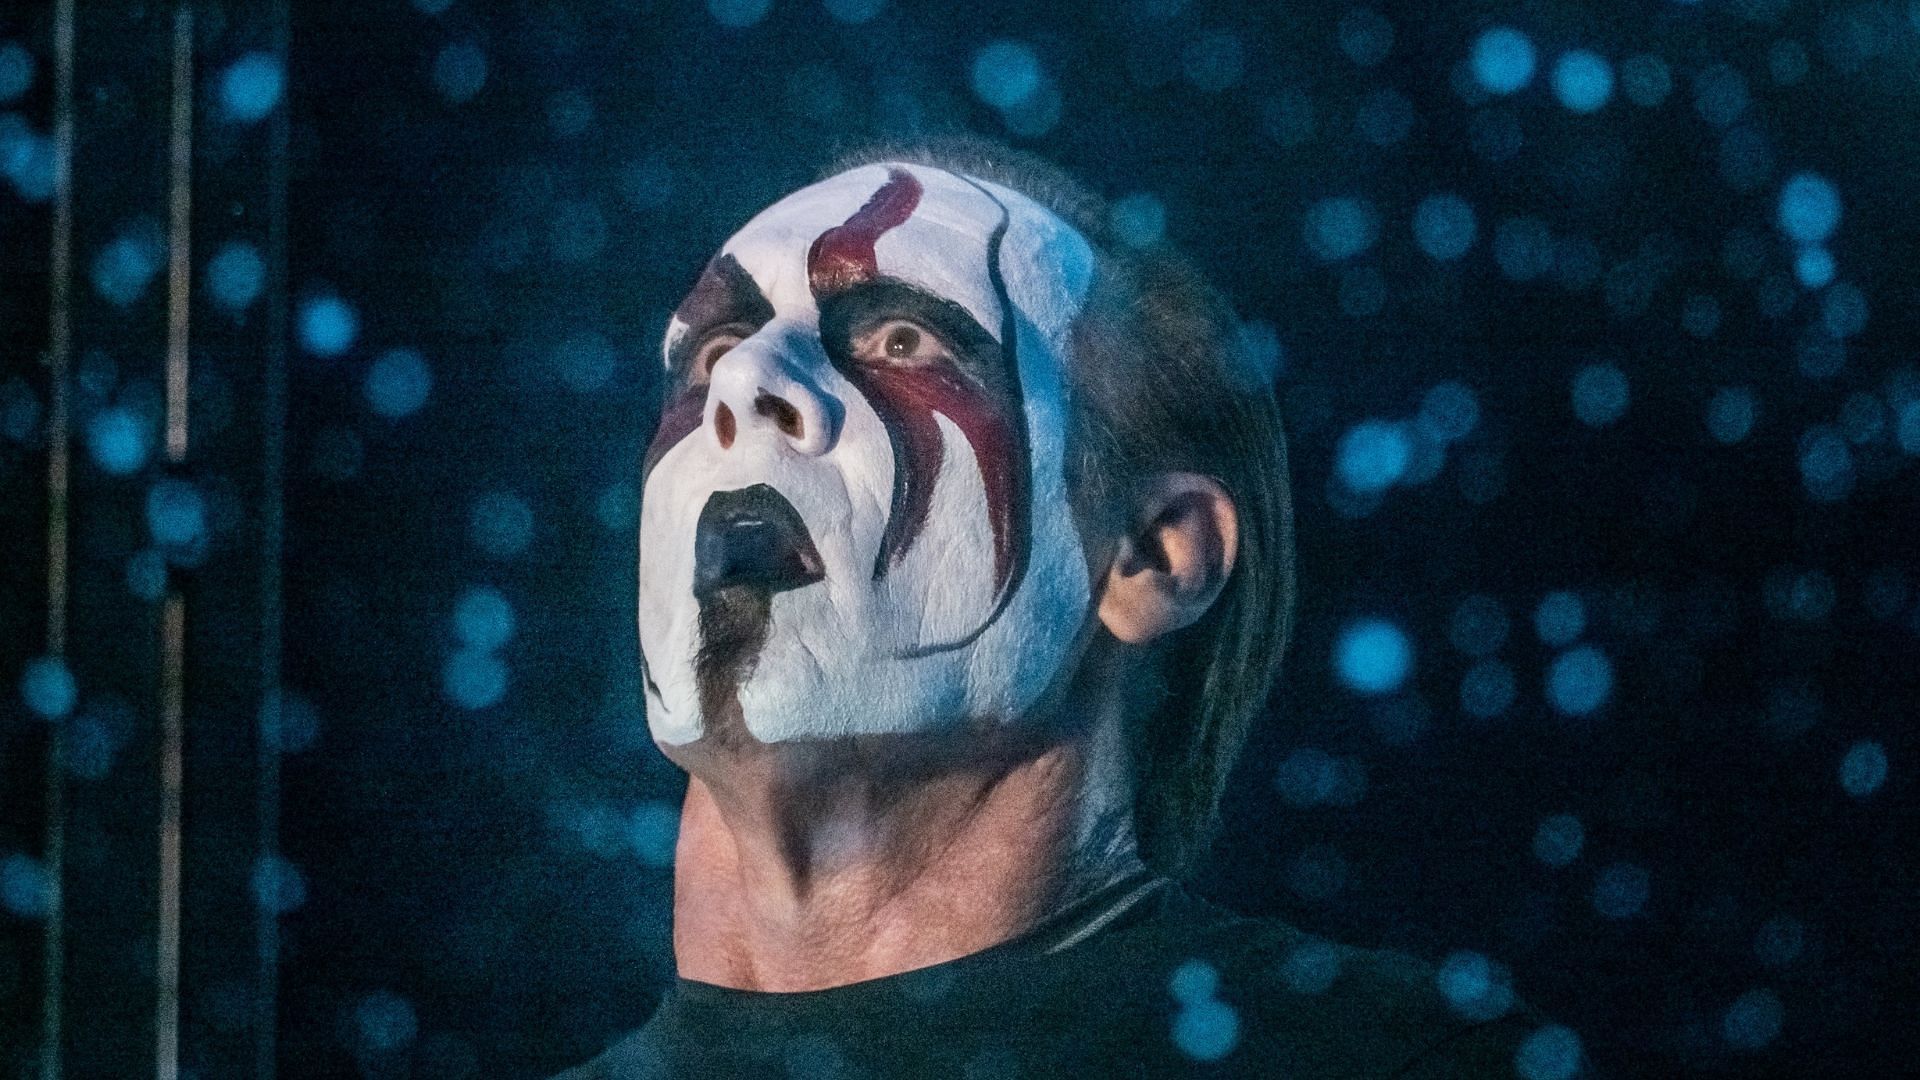 Sting making his entrance at AEW Revolution 2022